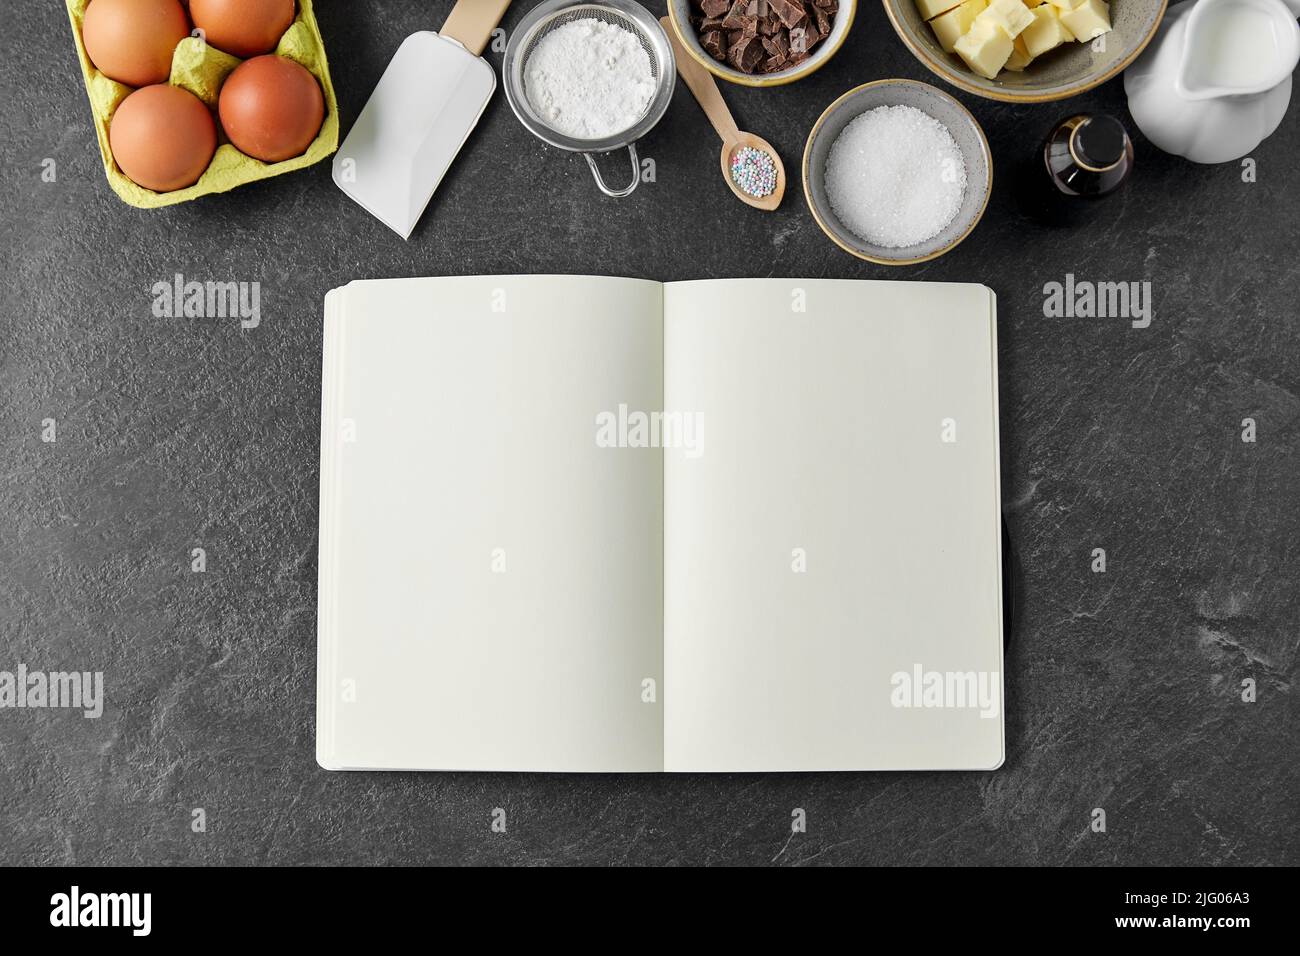 recipe book and cooking ingredients on table Stock Photo